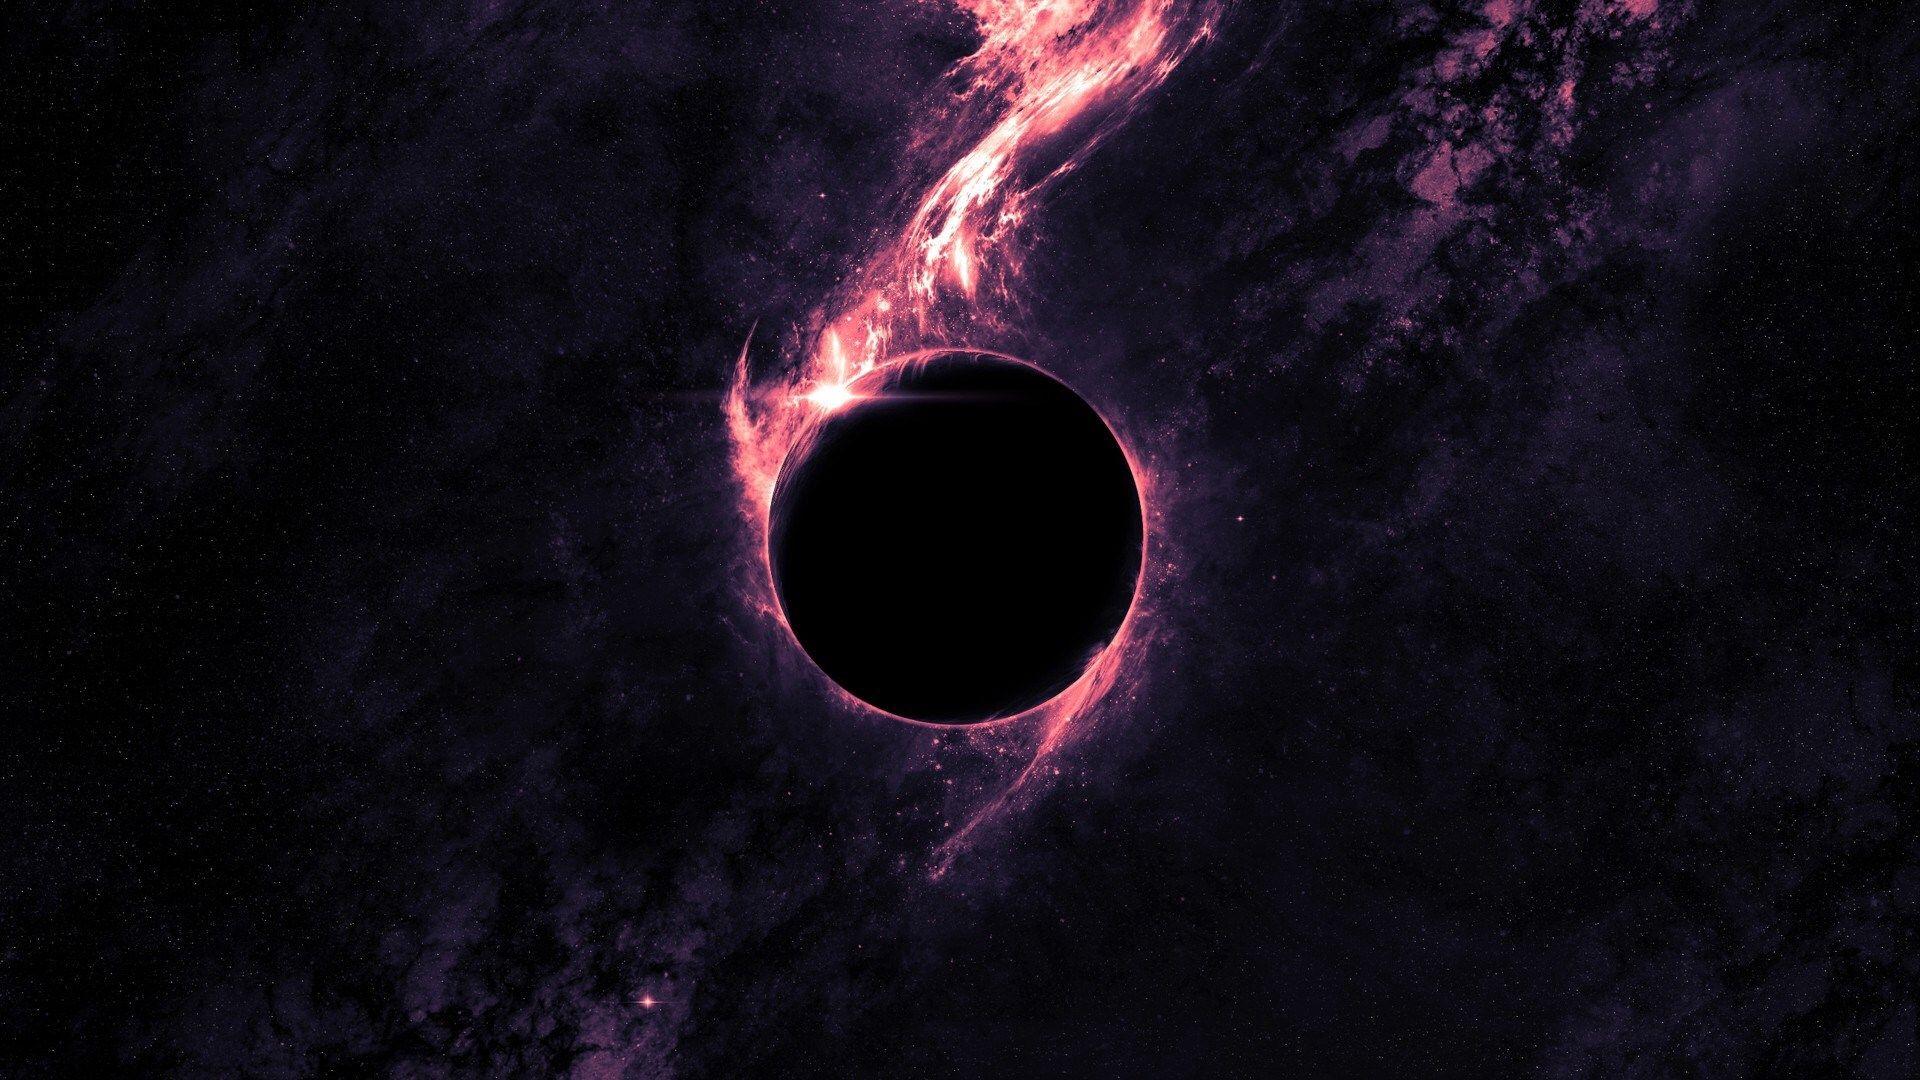 80+ Sci Fi Black Hole HD Wallpapers and Backgrounds